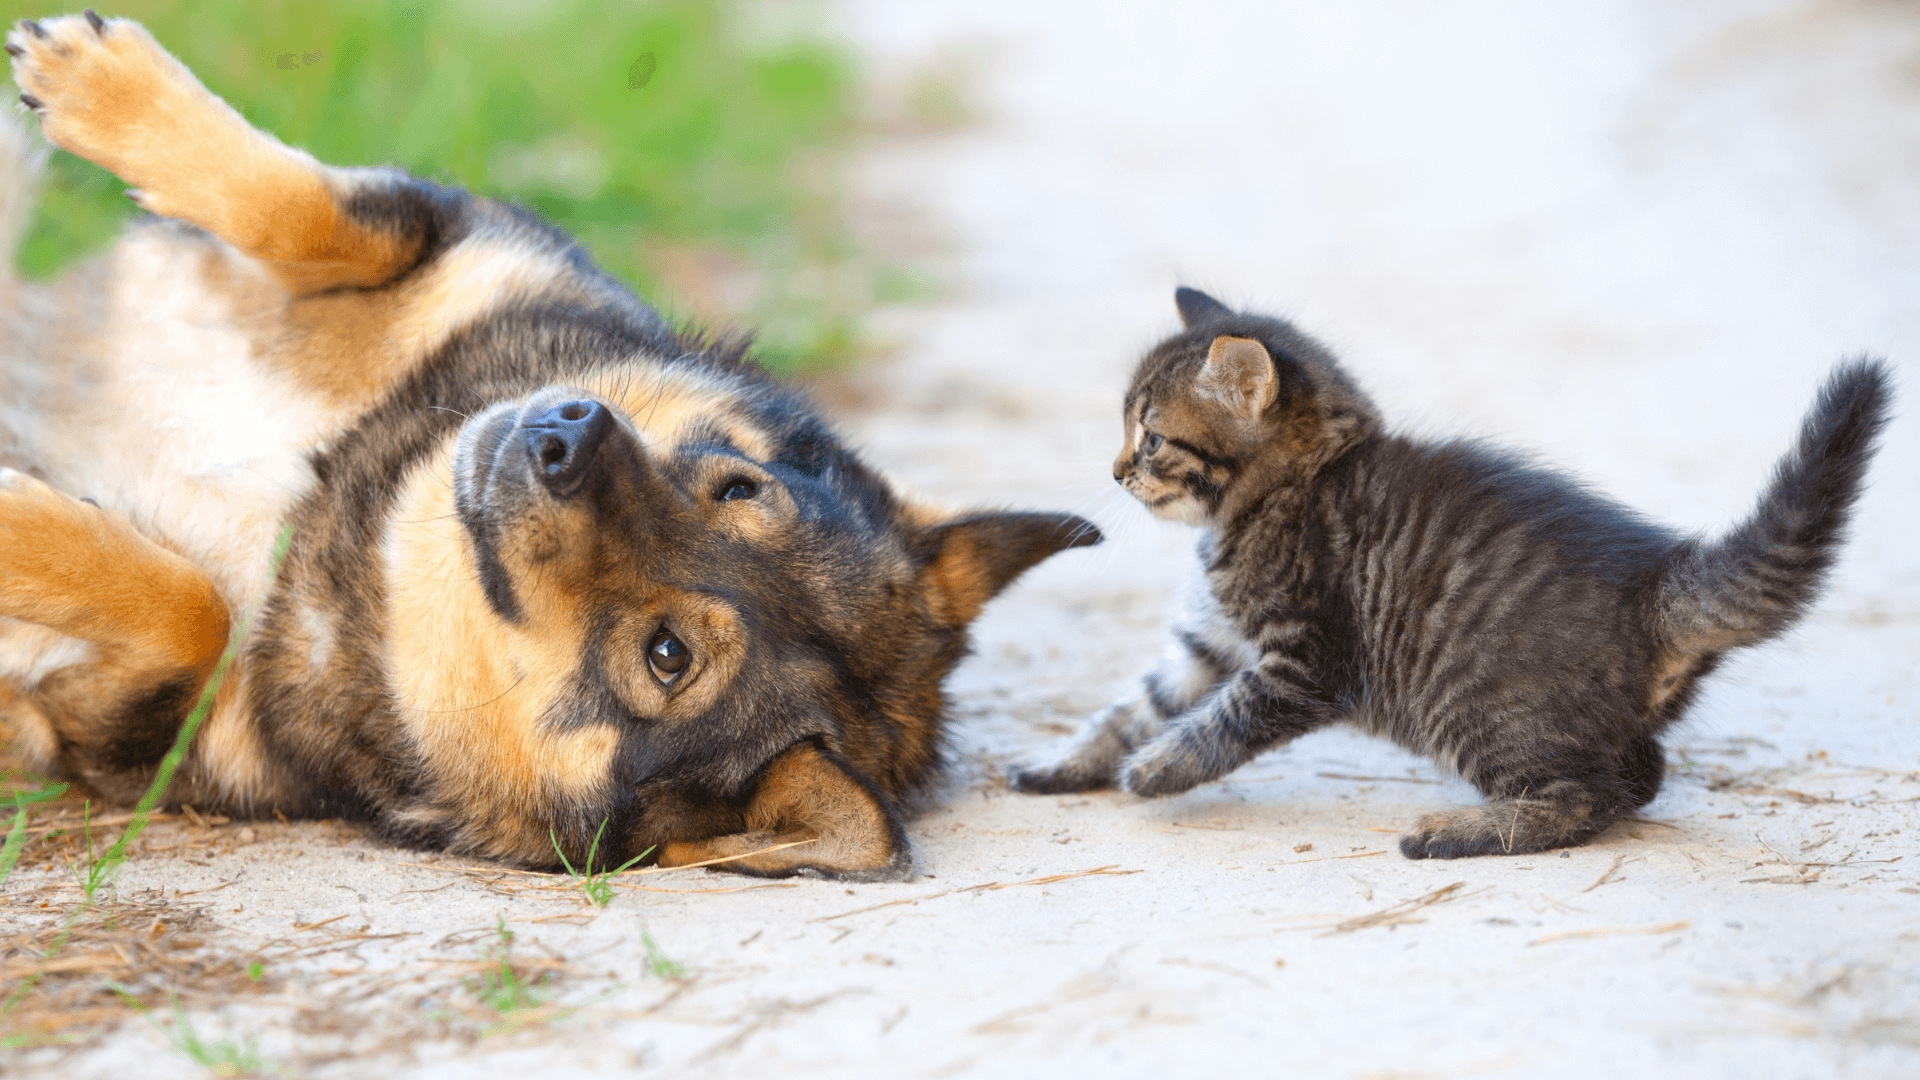 New study: Cats and dogs don't actually fight like cats and dogs